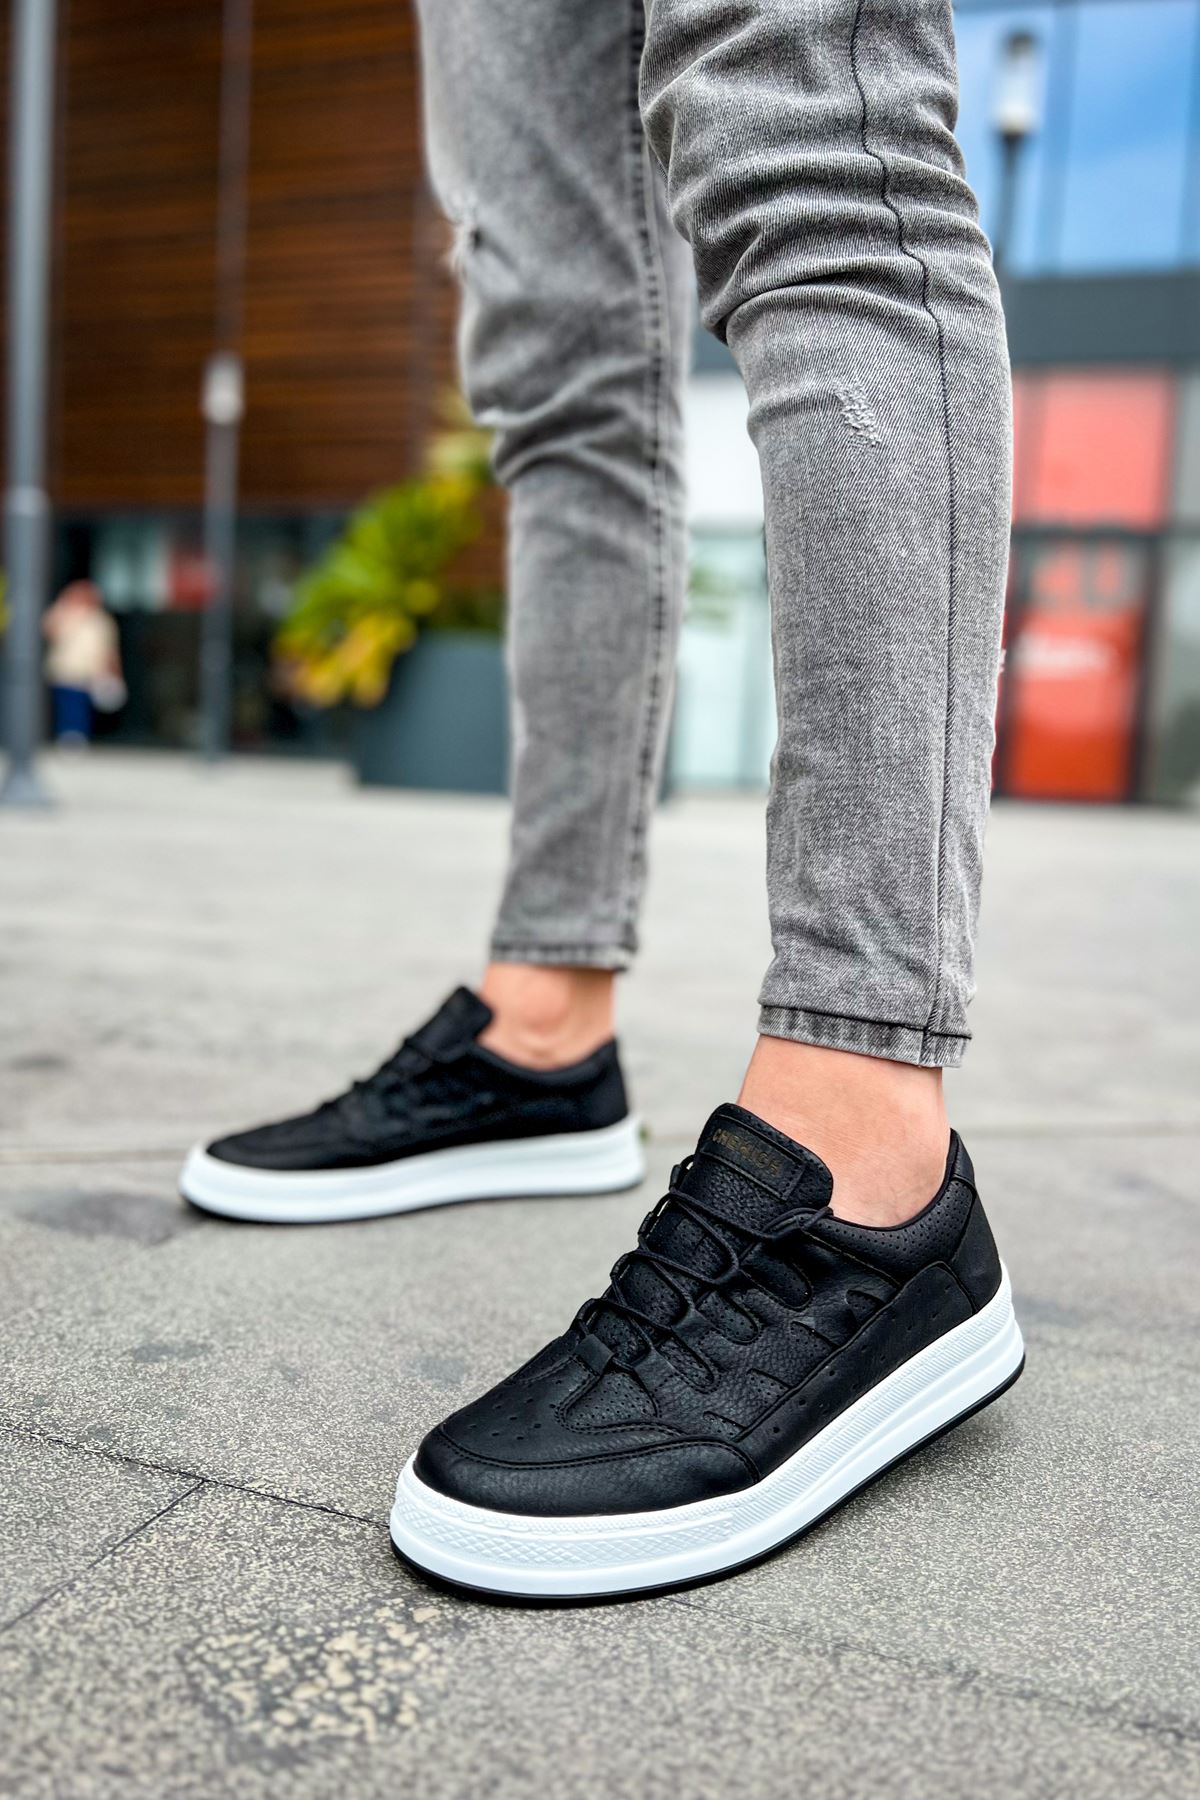 CH040 Men's Unisex Orthopedics Black-White Sole Casual Sneaker Sports Shoes - STREETMODE ™